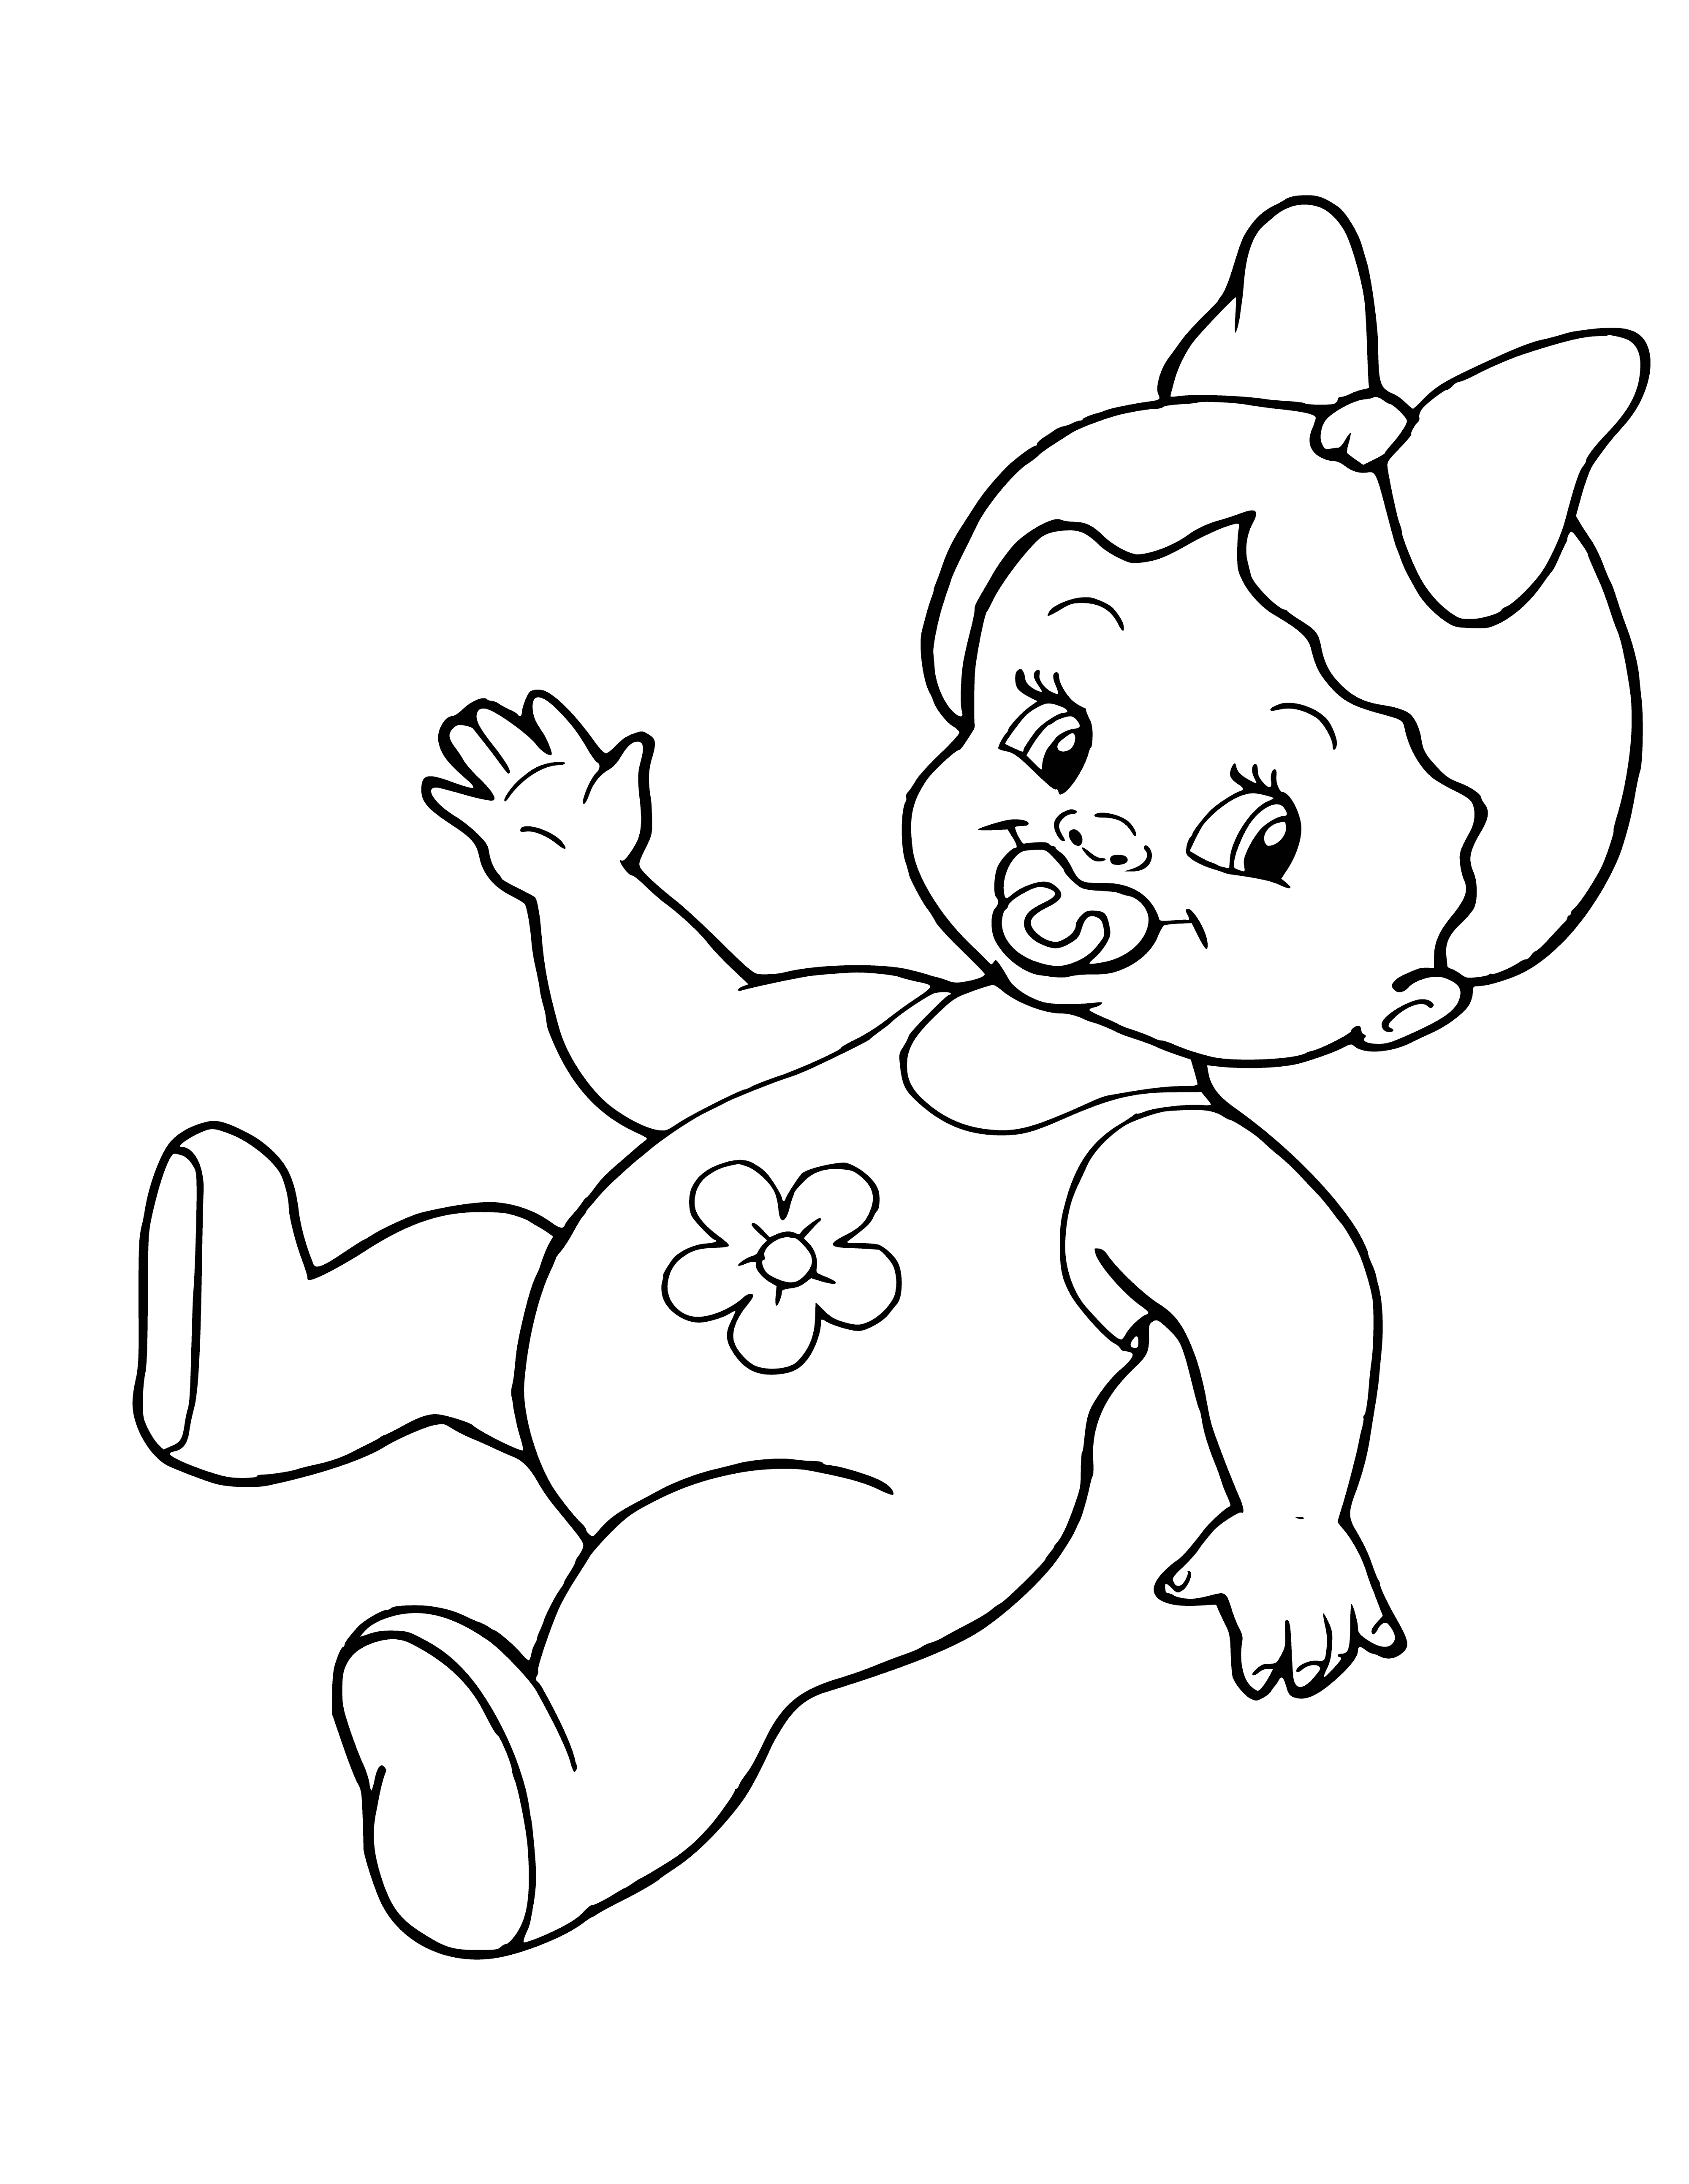 Dummy doll coloring page